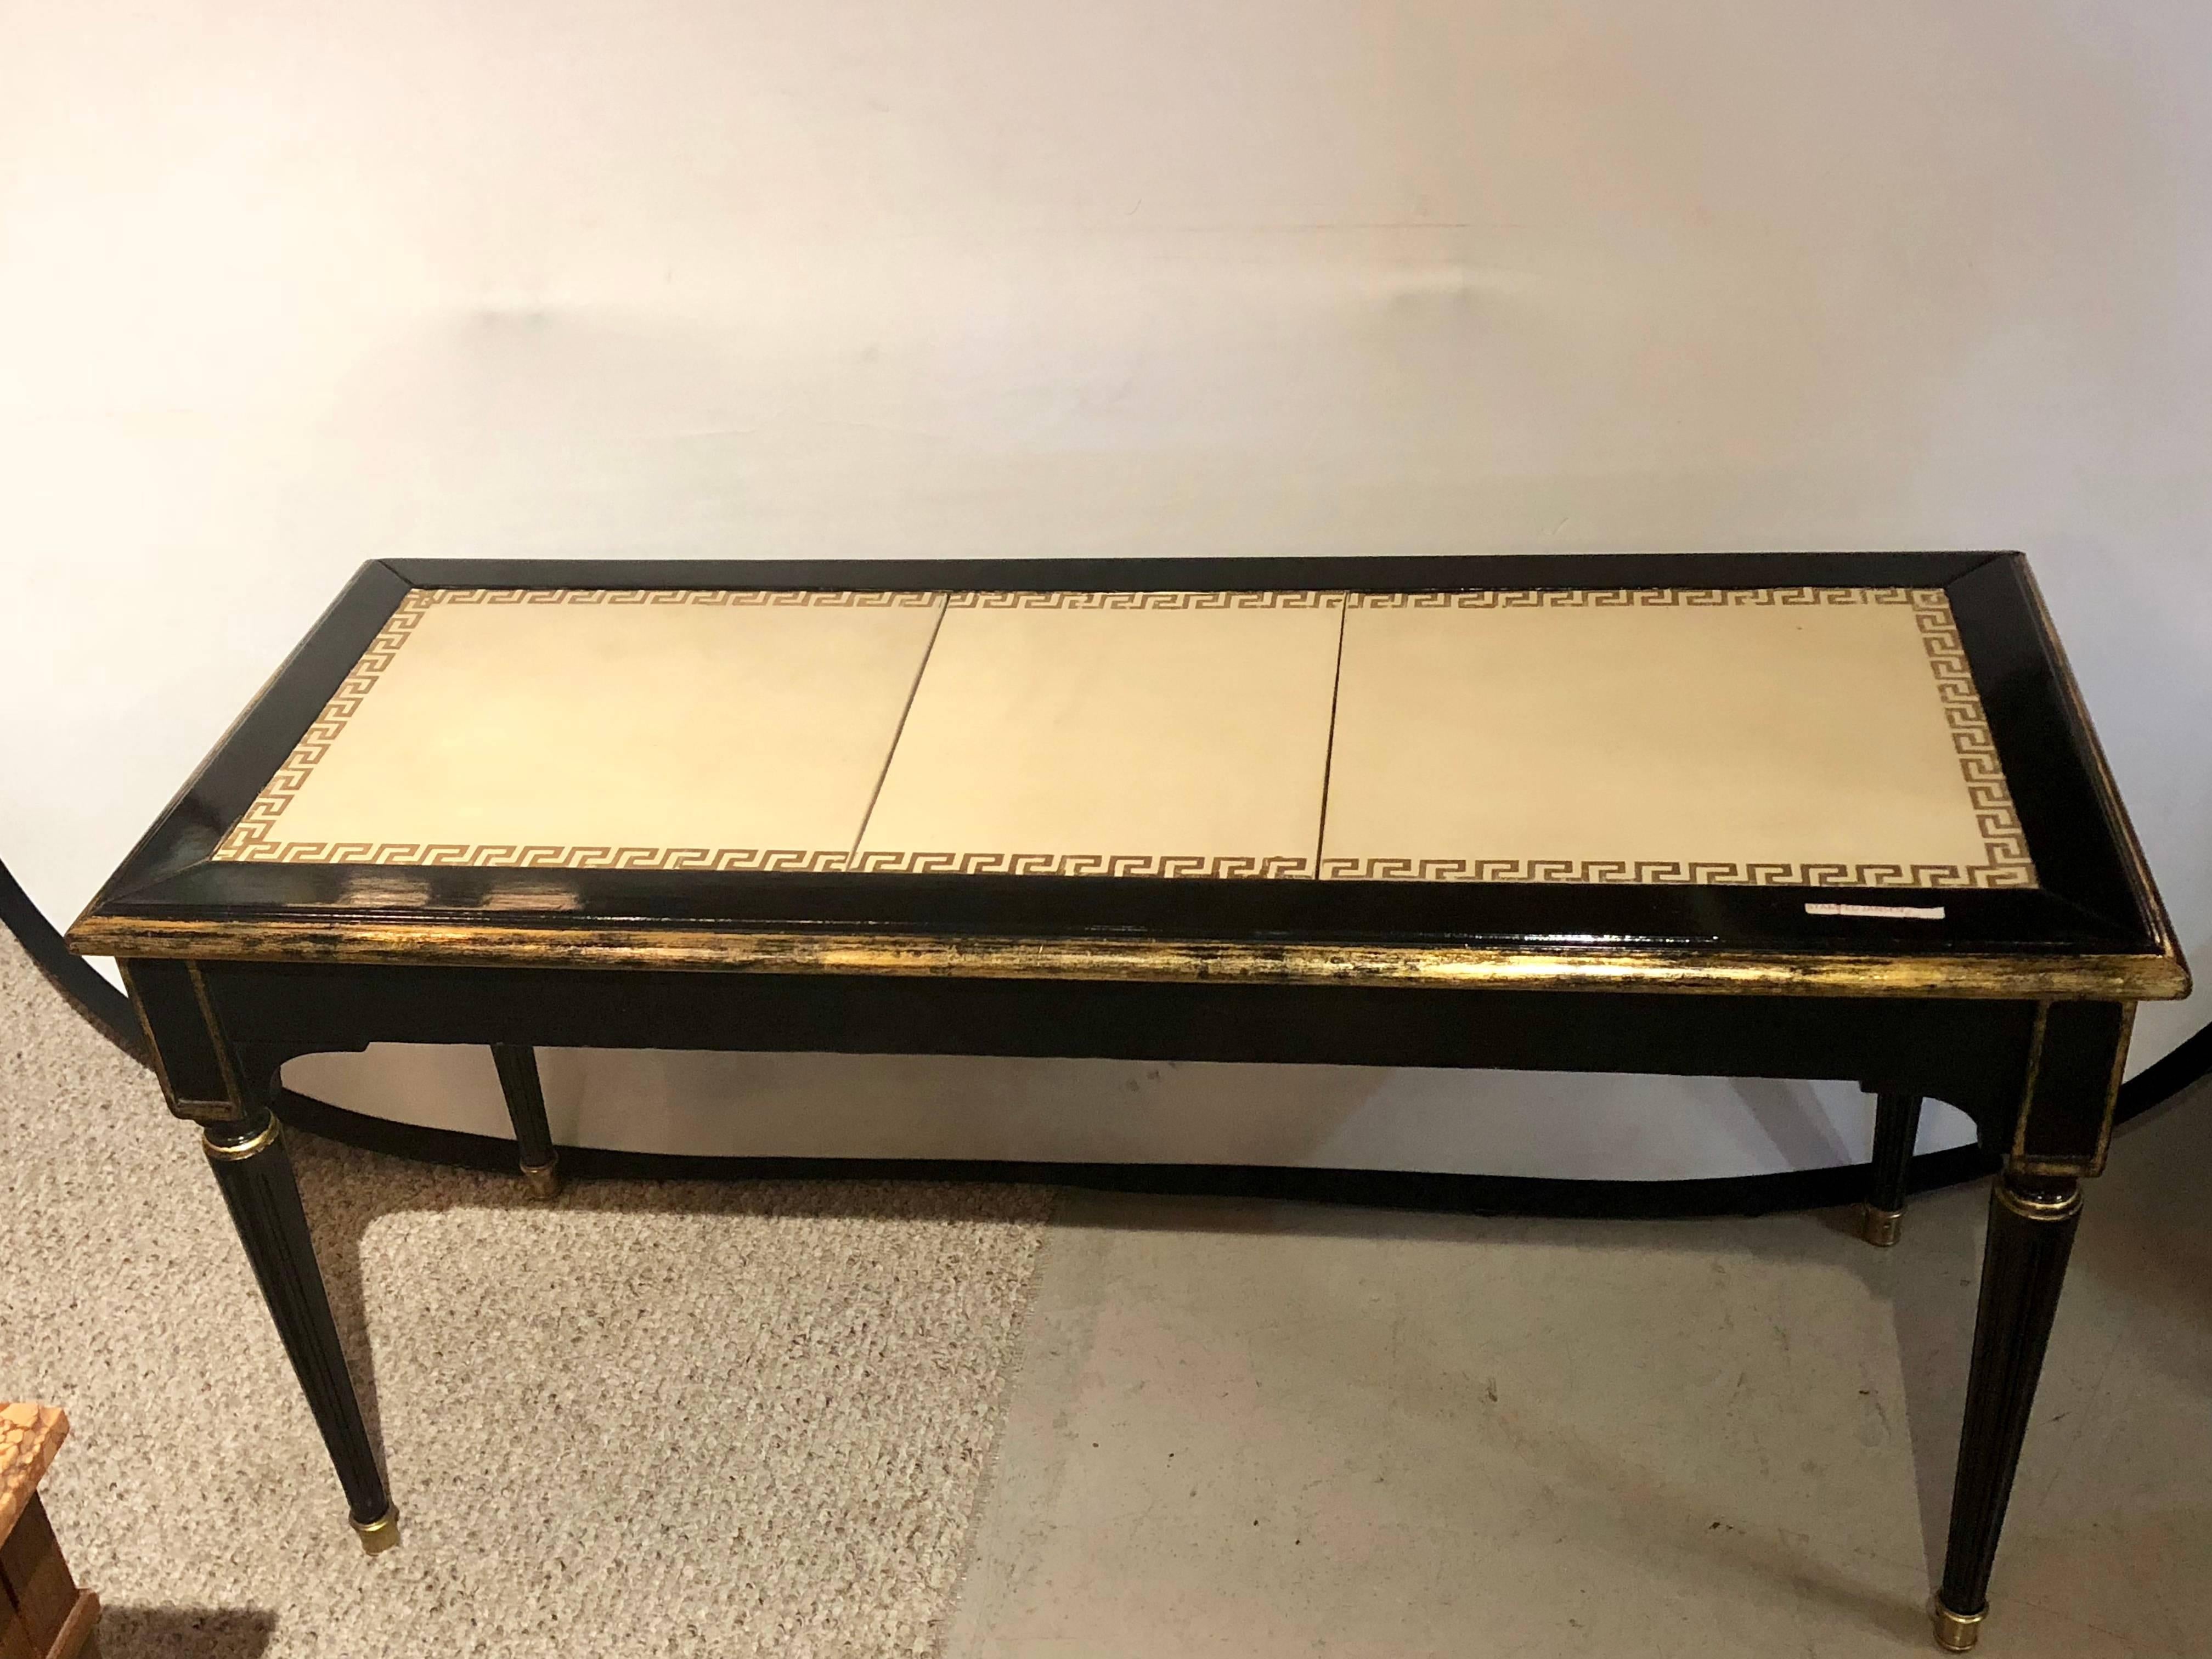 Hollywood Regency, Bench, Table, Black Lacquer Wood, Gold Greek Key, Tan Leather In Good Condition For Sale In Stamford, CT